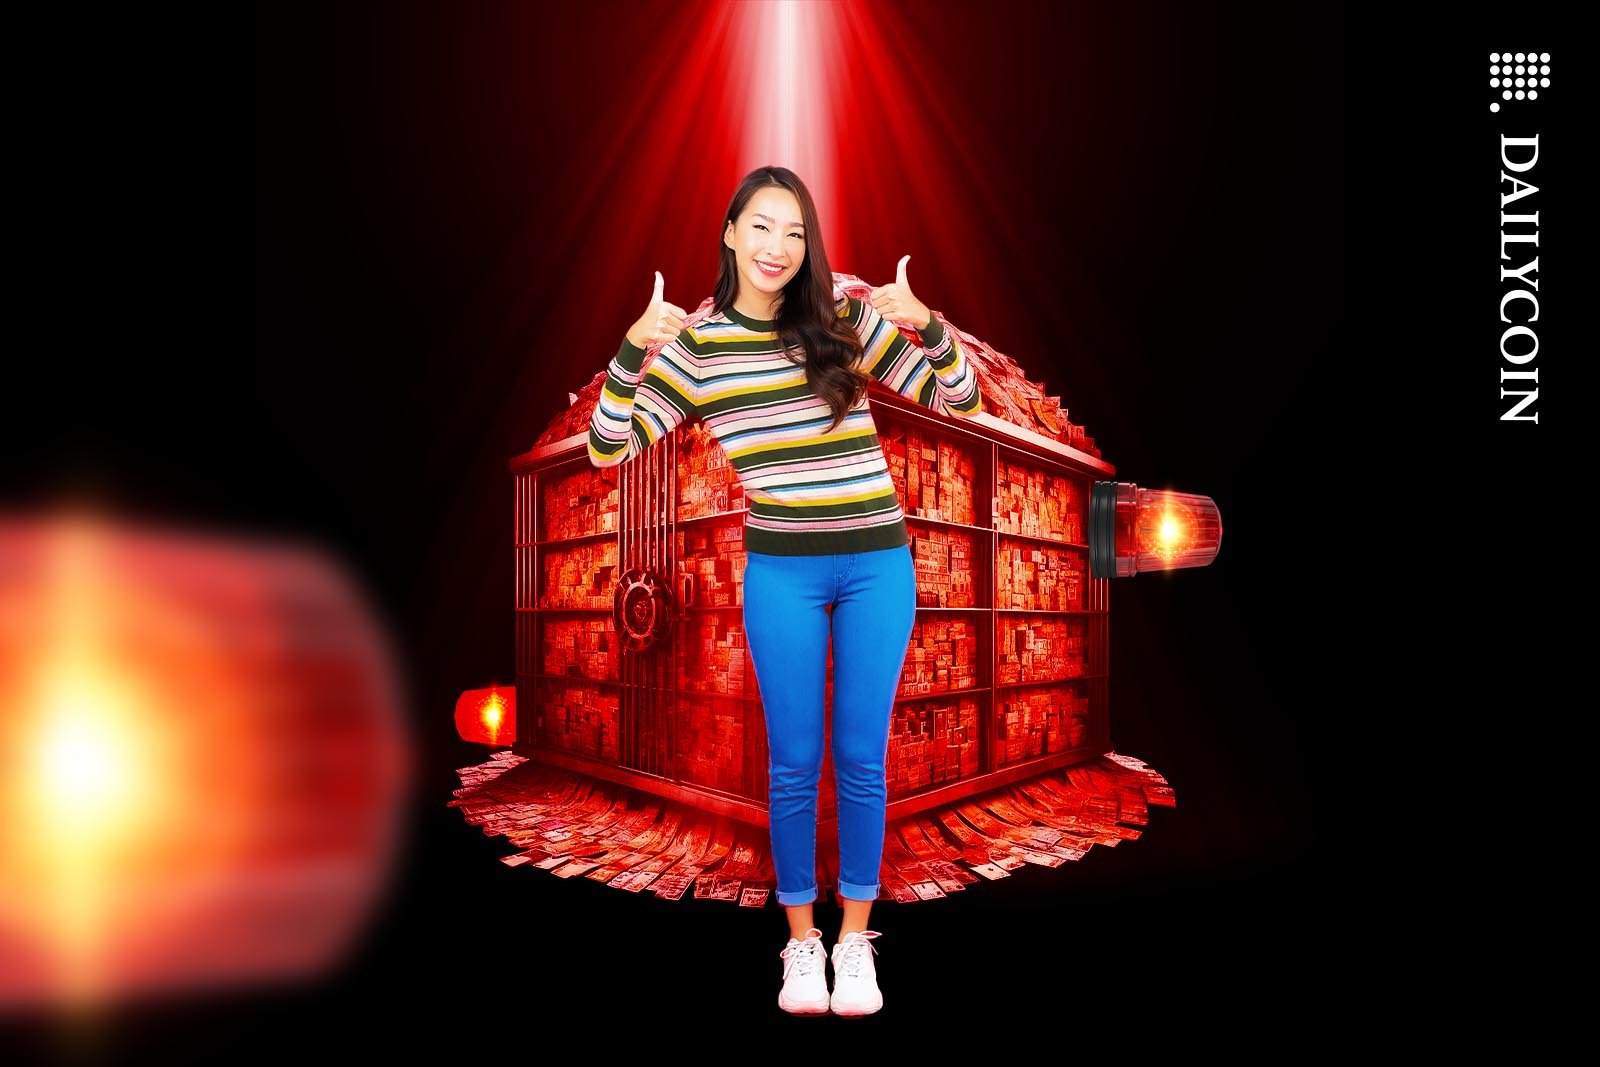 Asian girl showing the thumbs up in front of a cage full of money, surrounded by red warning lights.